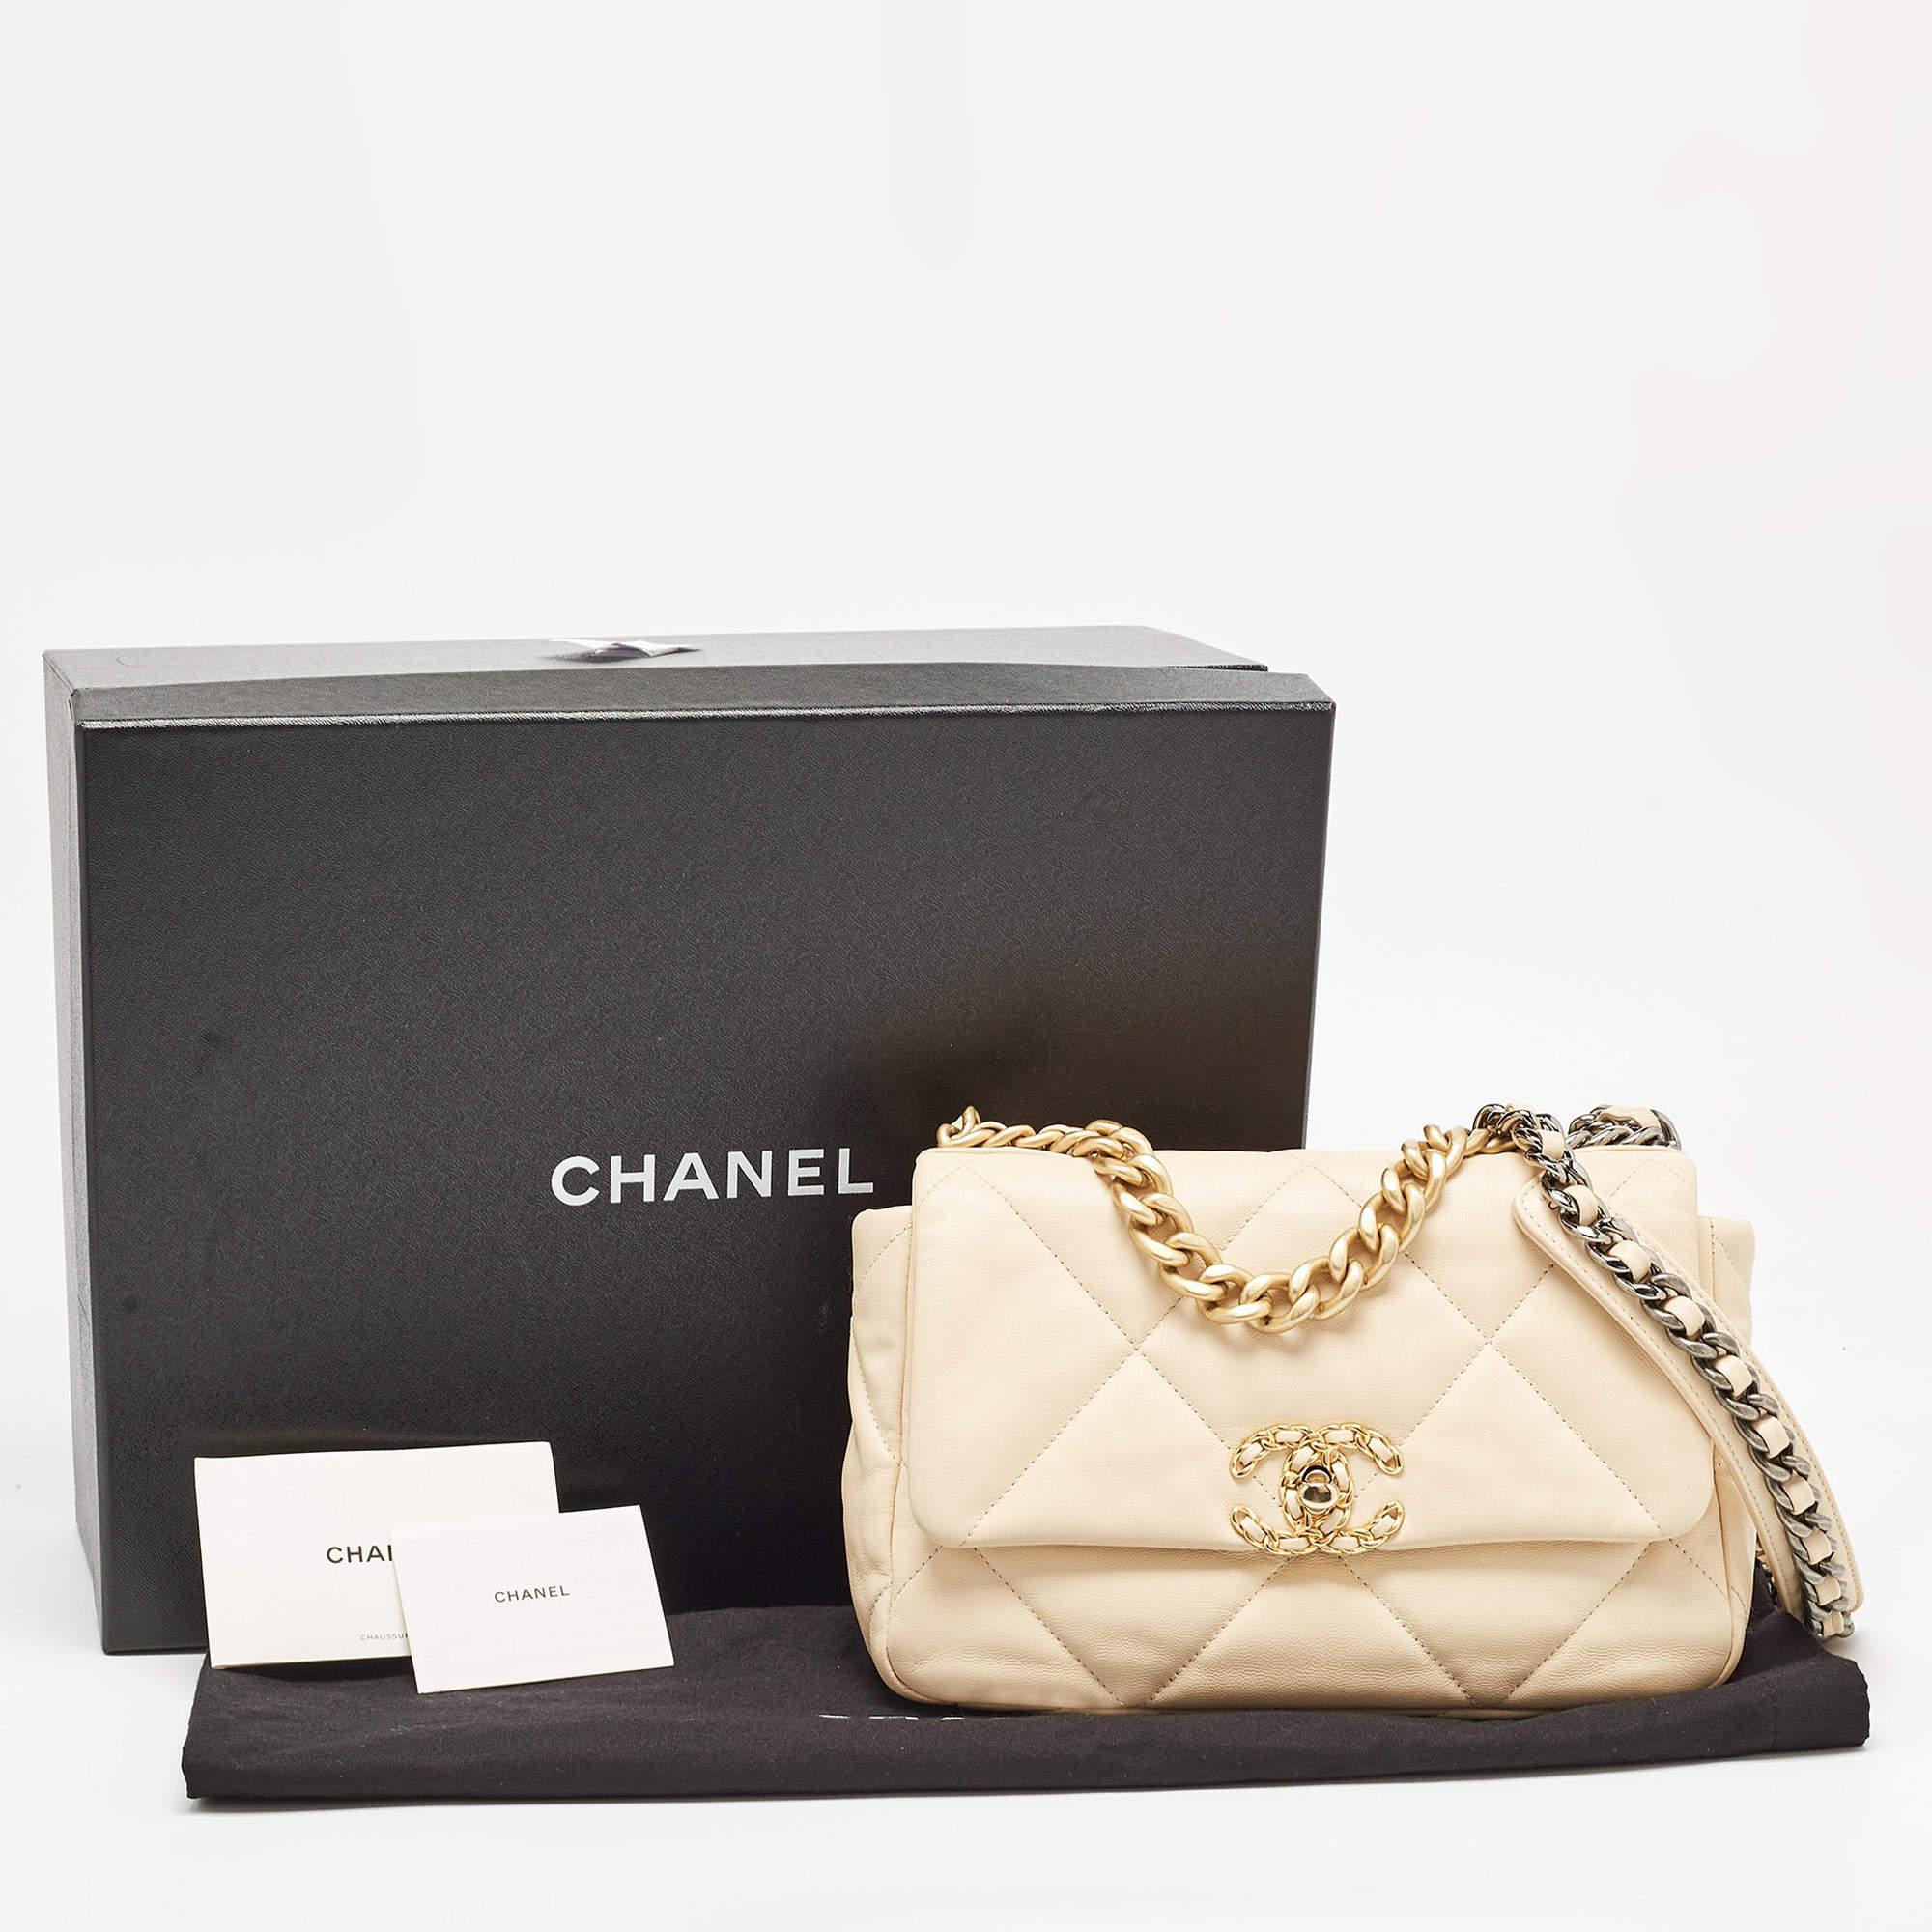 Chanel Beige Quilted Leather Medium 19 Flap Bag 14